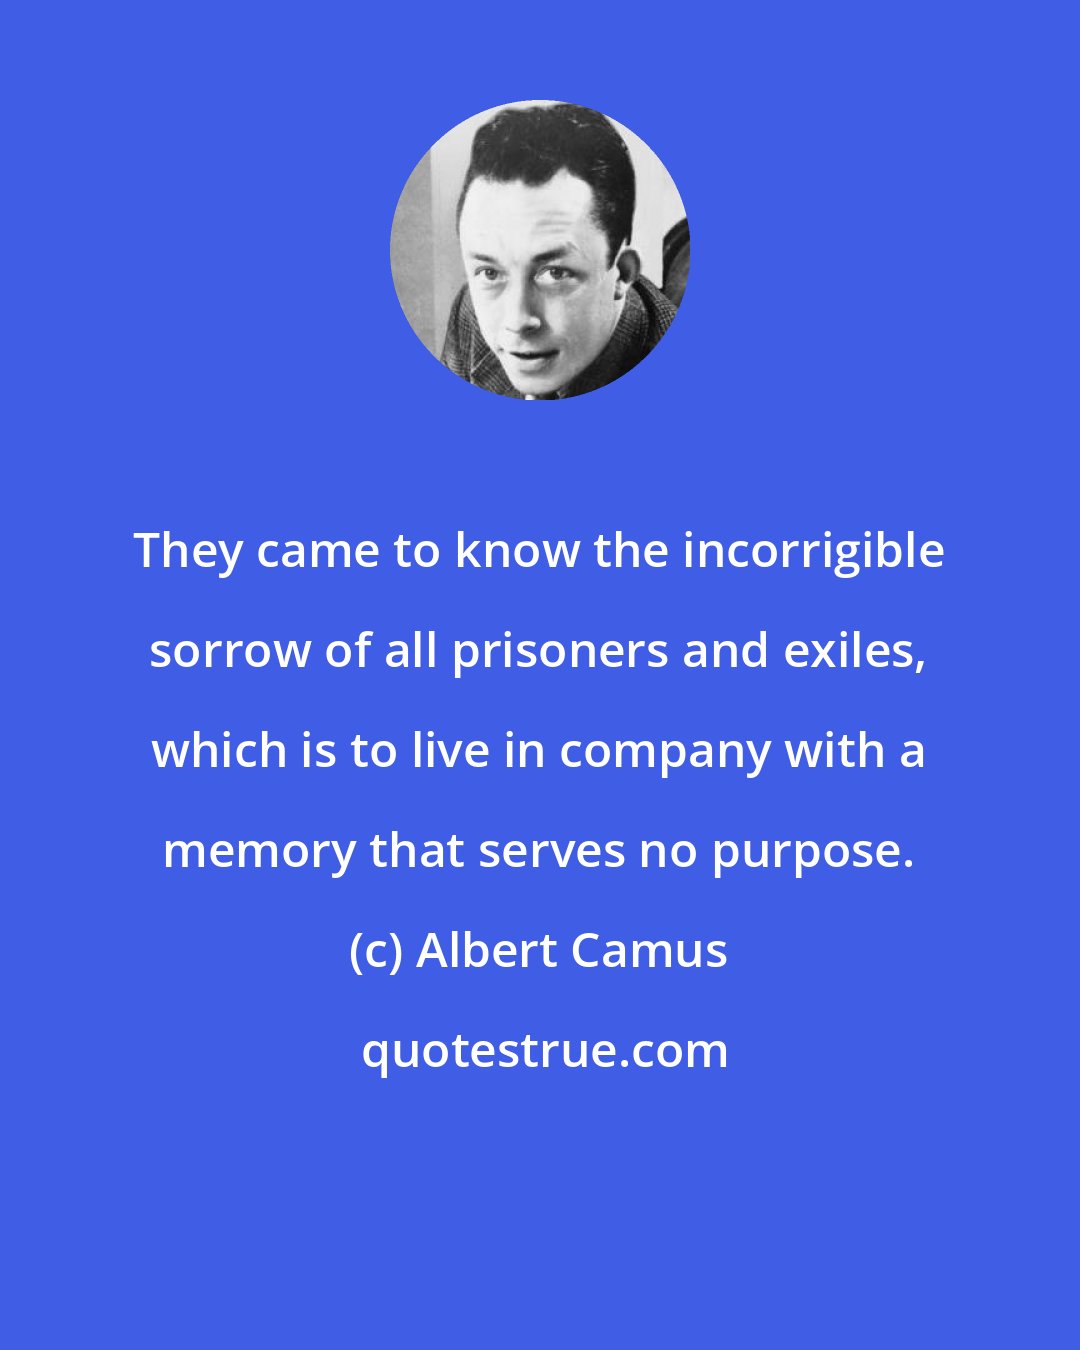 Albert Camus: They came to know the incorrigible sorrow of all prisoners and exiles, which is to live in company with a memory that serves no purpose.